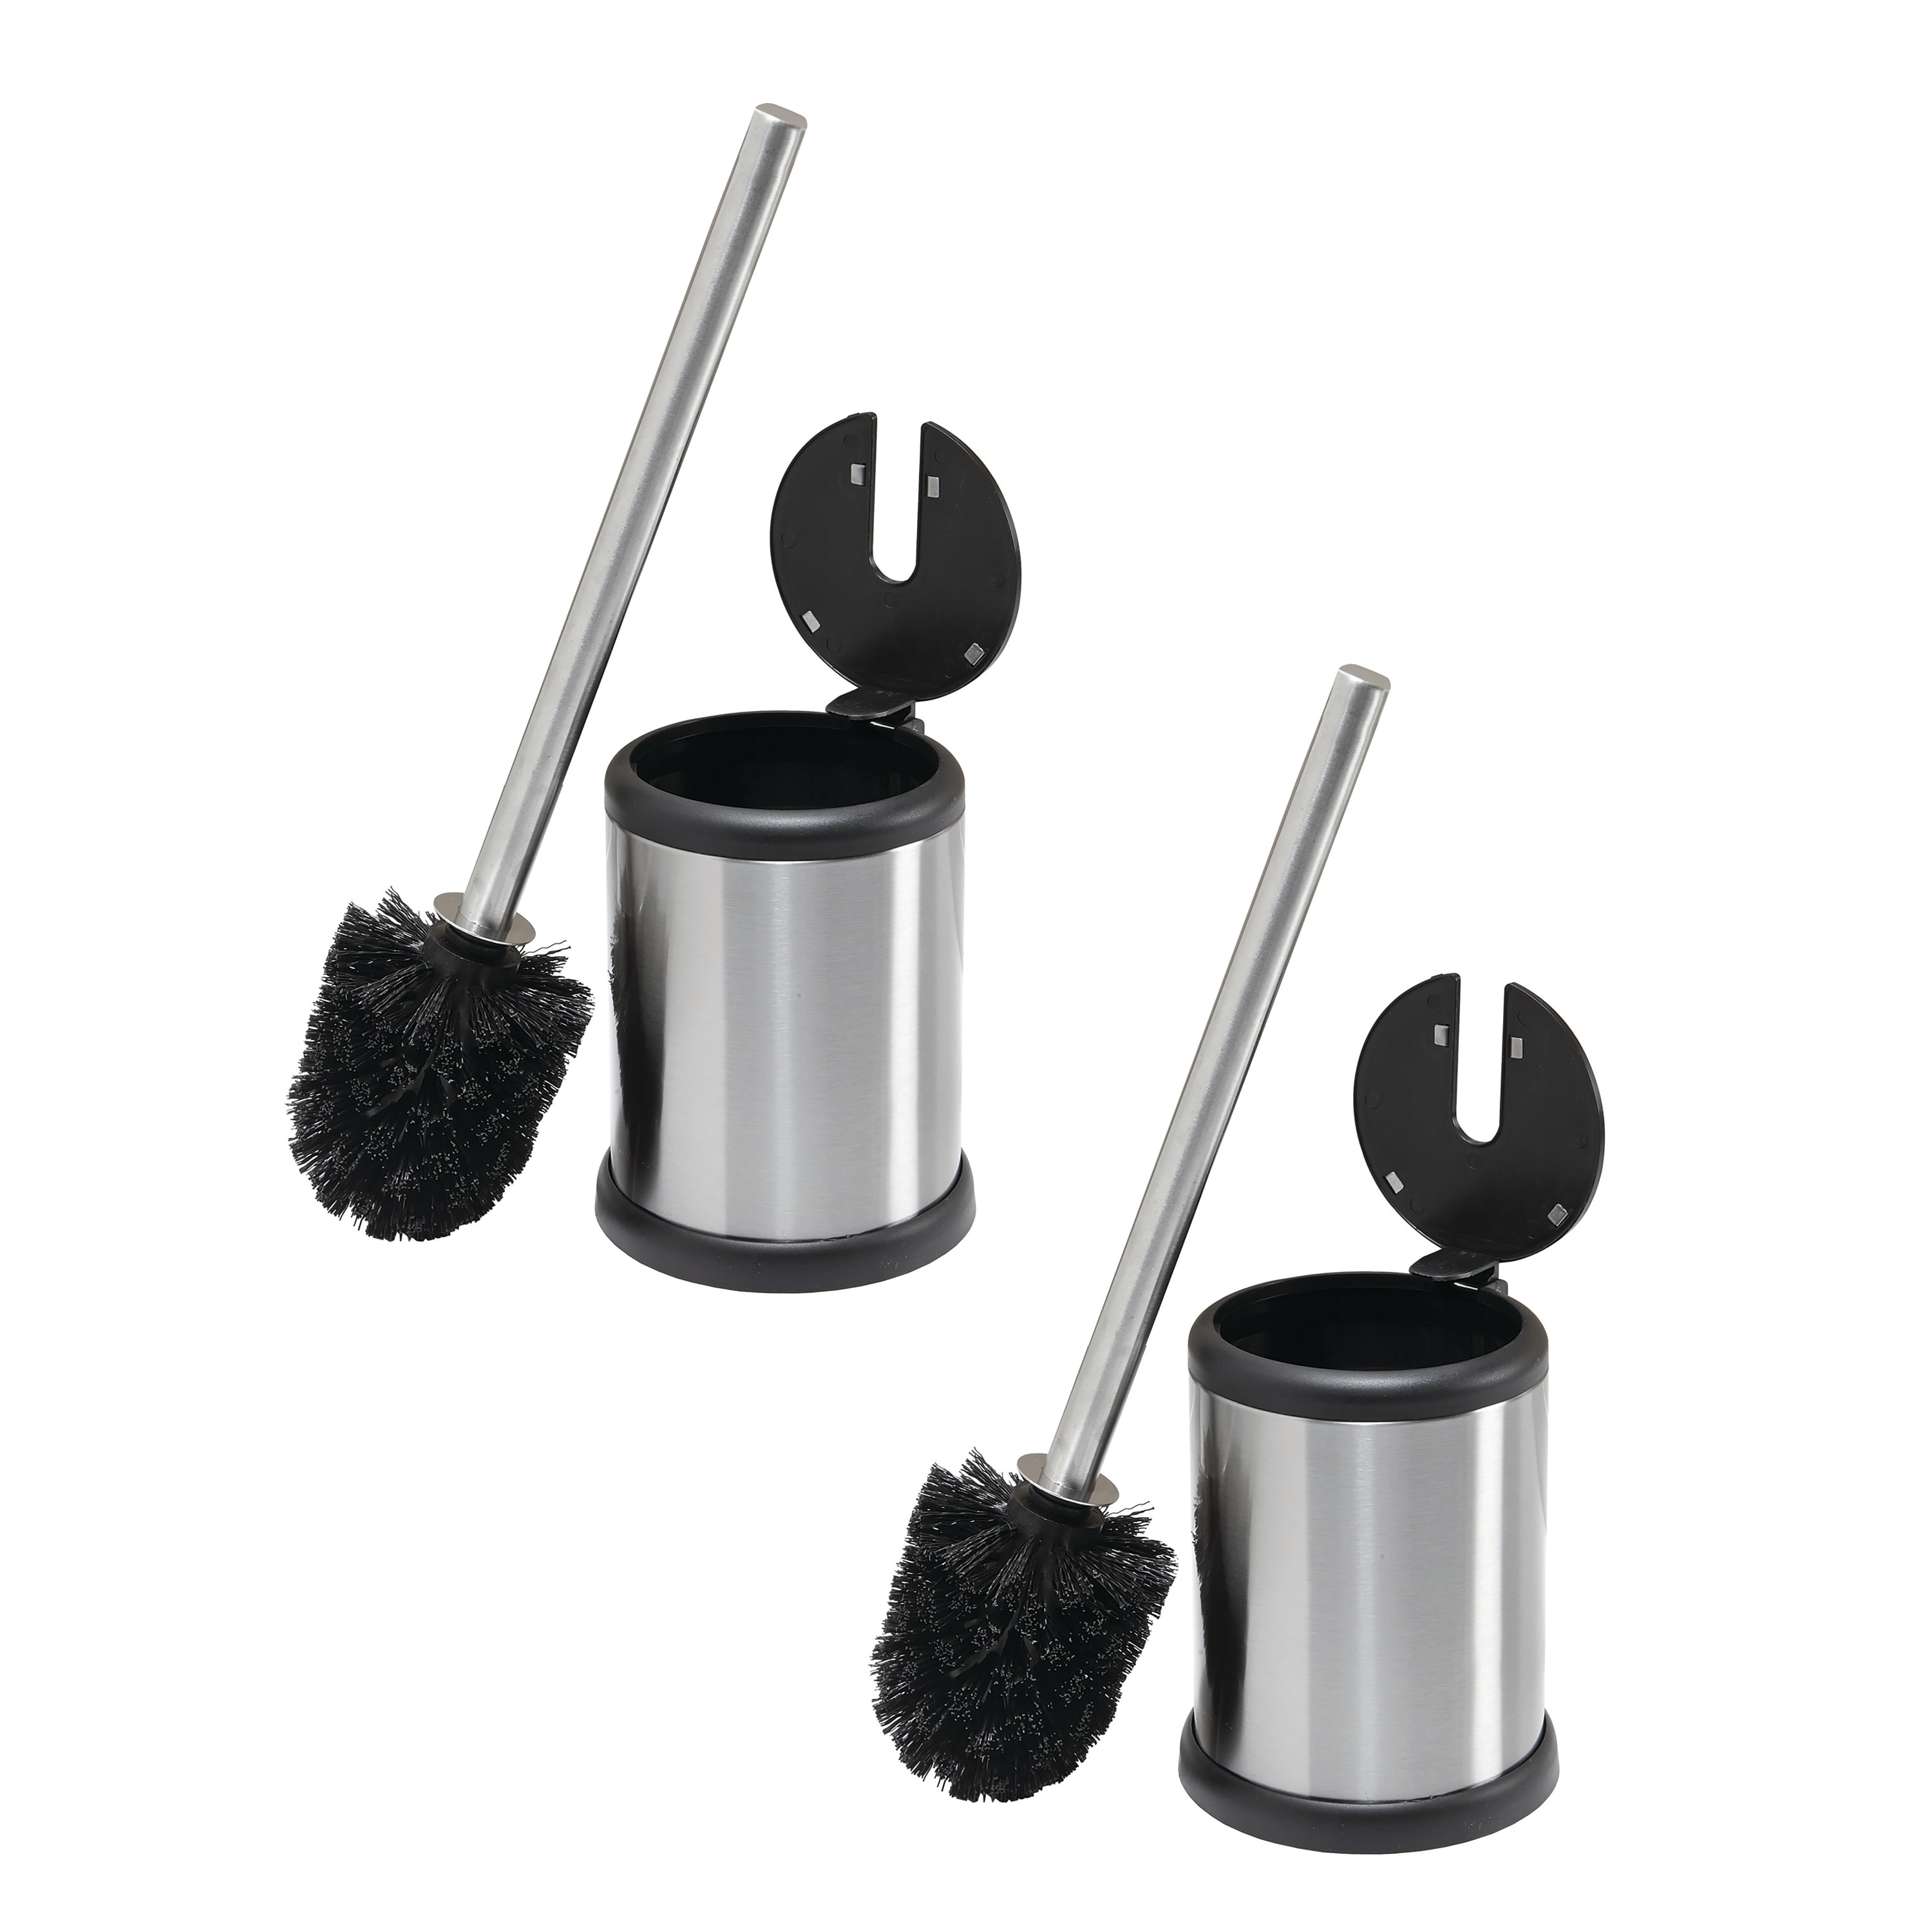 Replacement Stainless Steel WC Bathroom Cleaning Toilet Brush Head HoldersV!N 